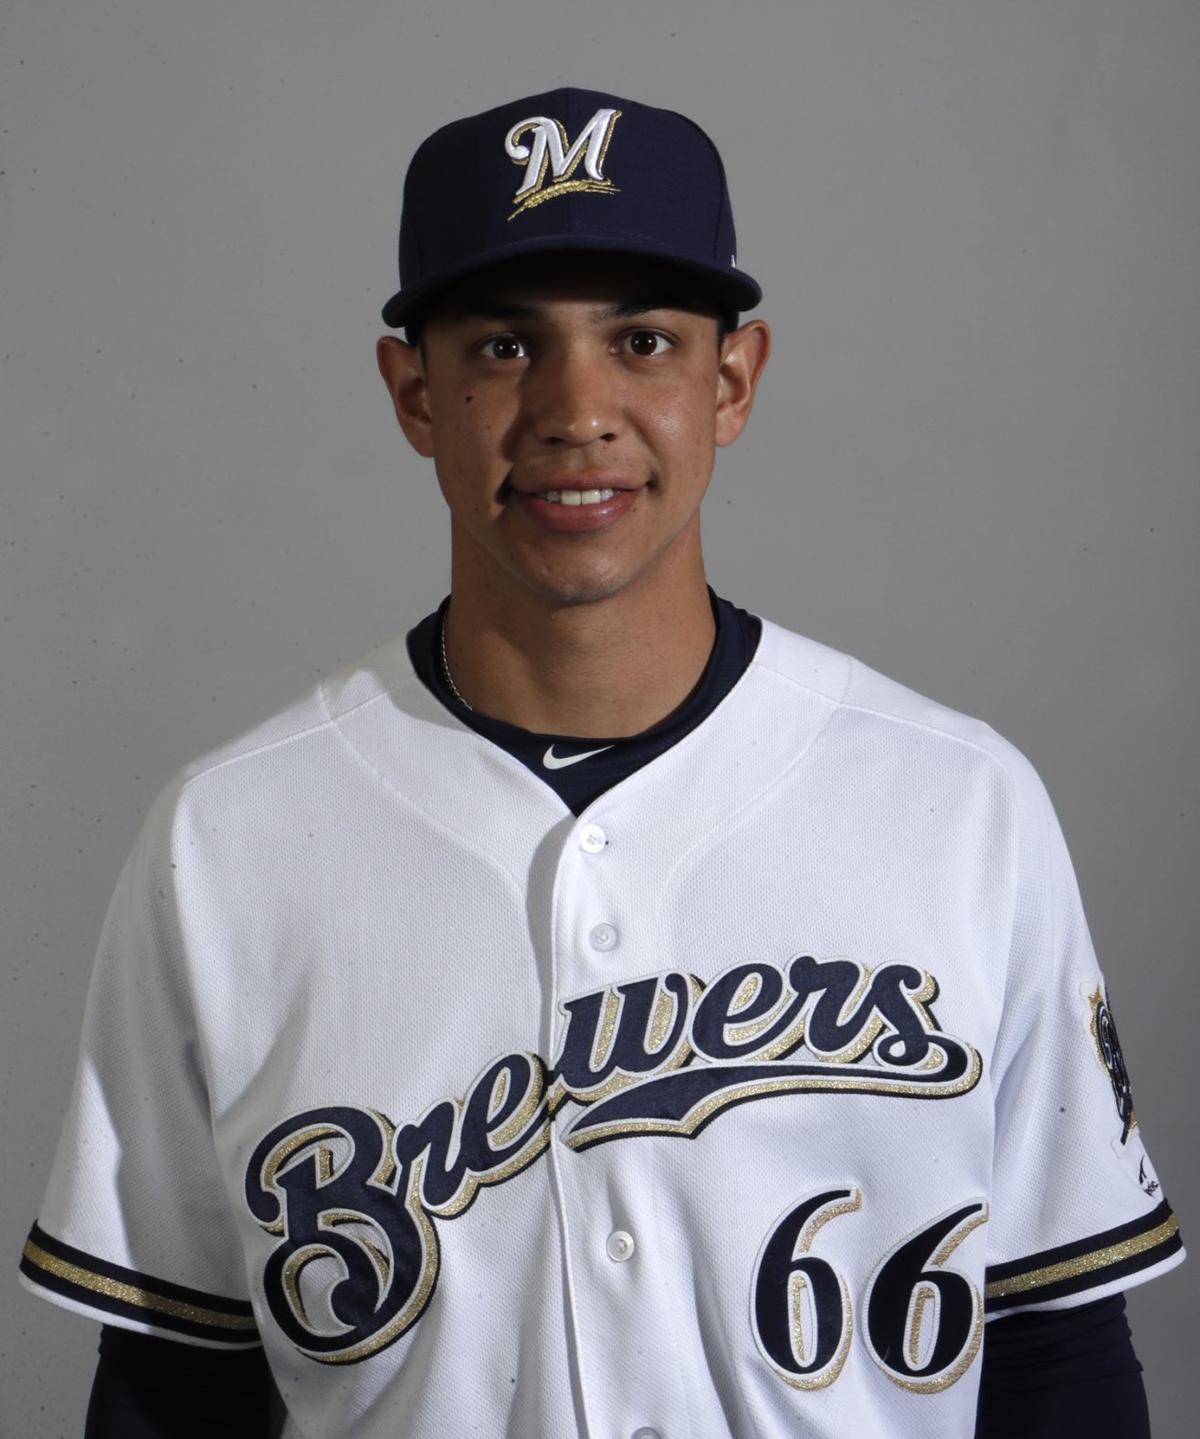 Brewers get early look at shortstop prospect Mauricio Dubon